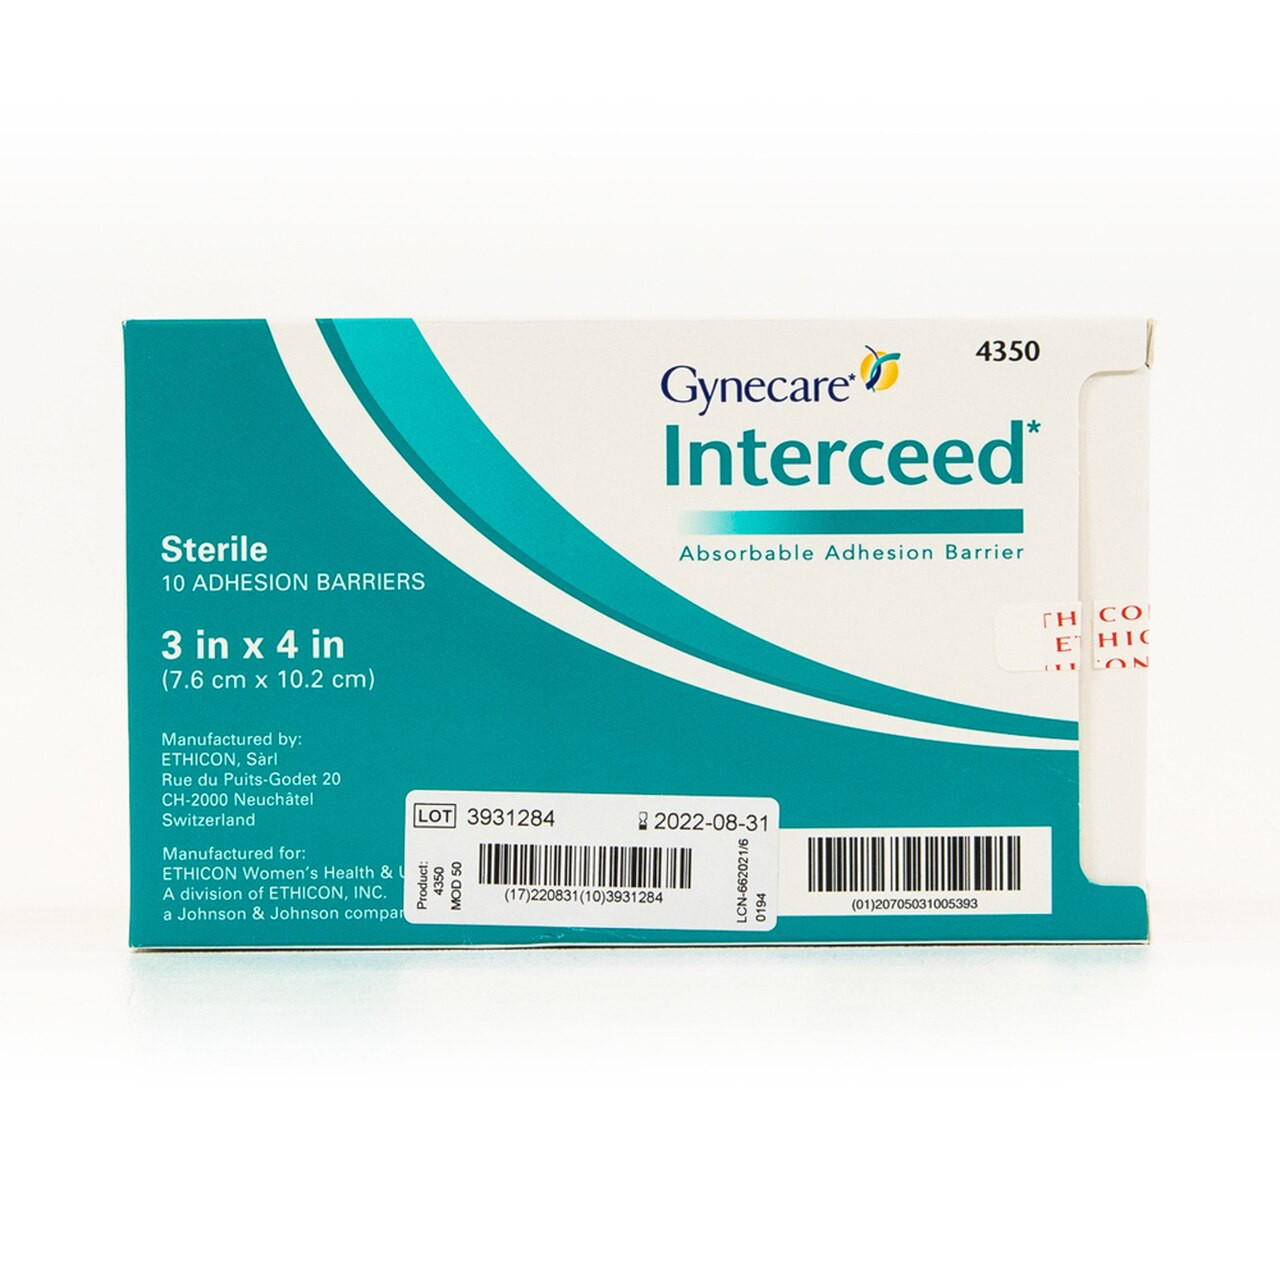 Gynecare 4350 - Interceed Absorbable Adhesion Barrier (3